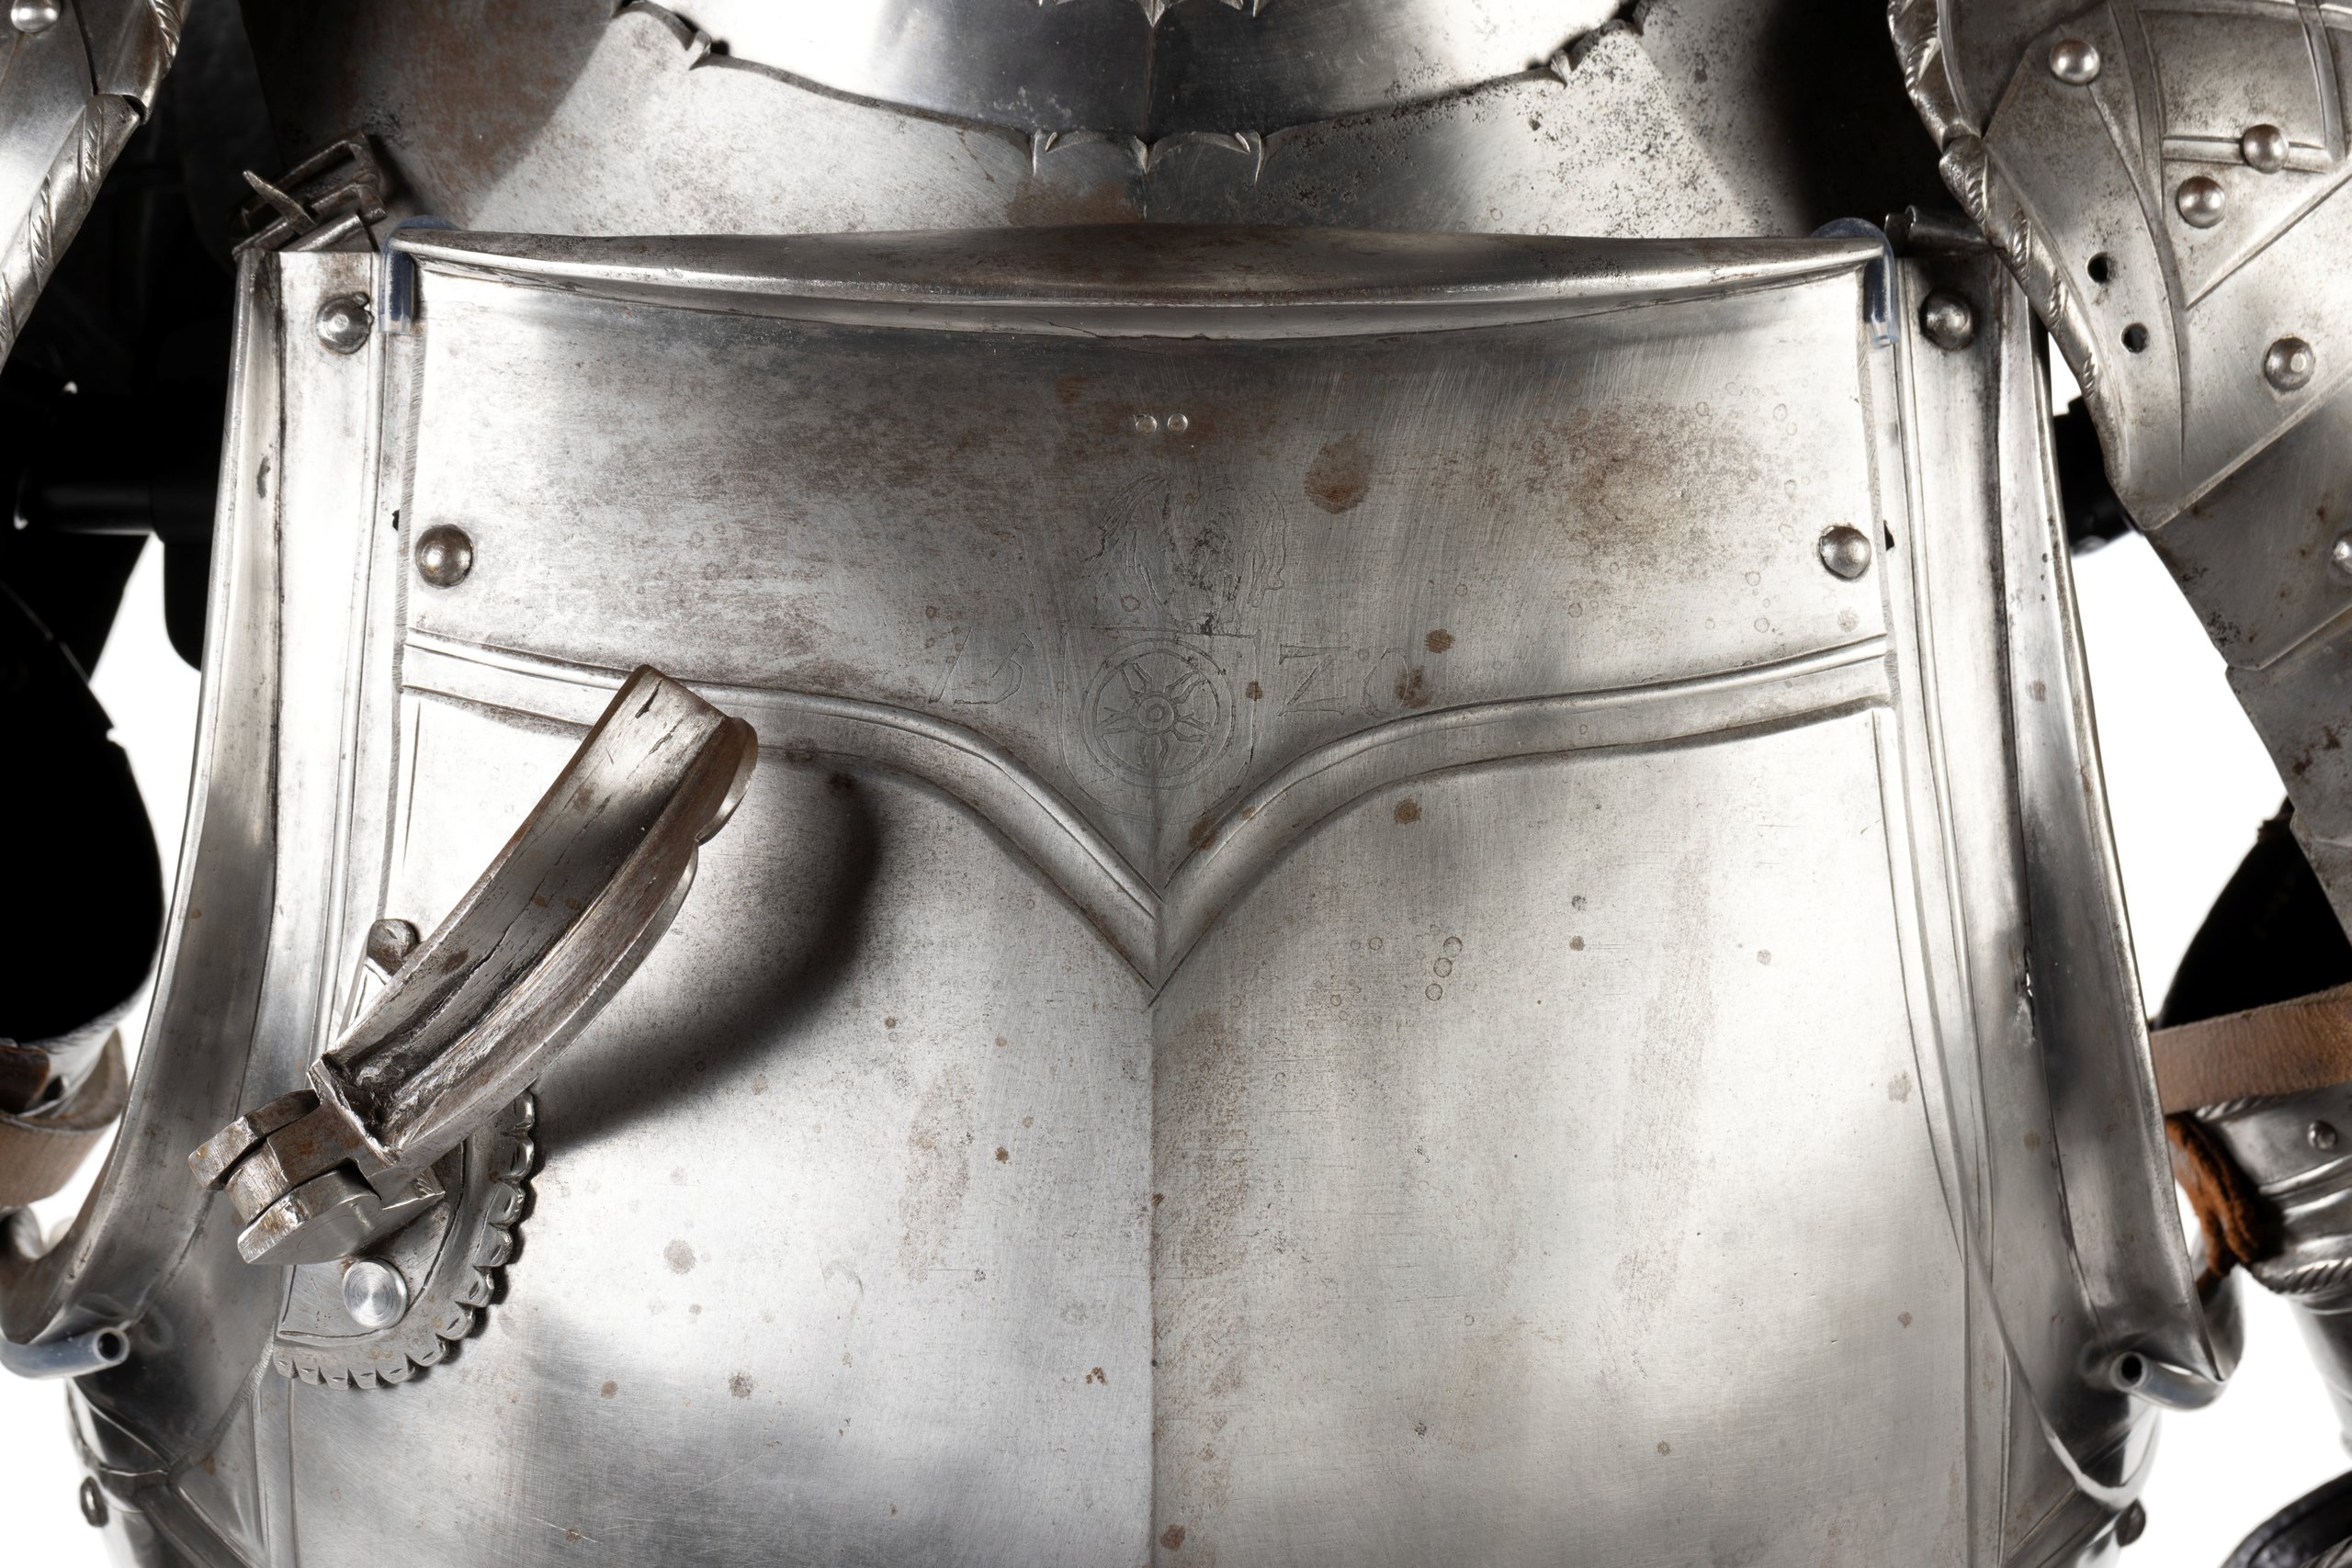 16th century armour with reproduction pieces made by Raymond Bartell